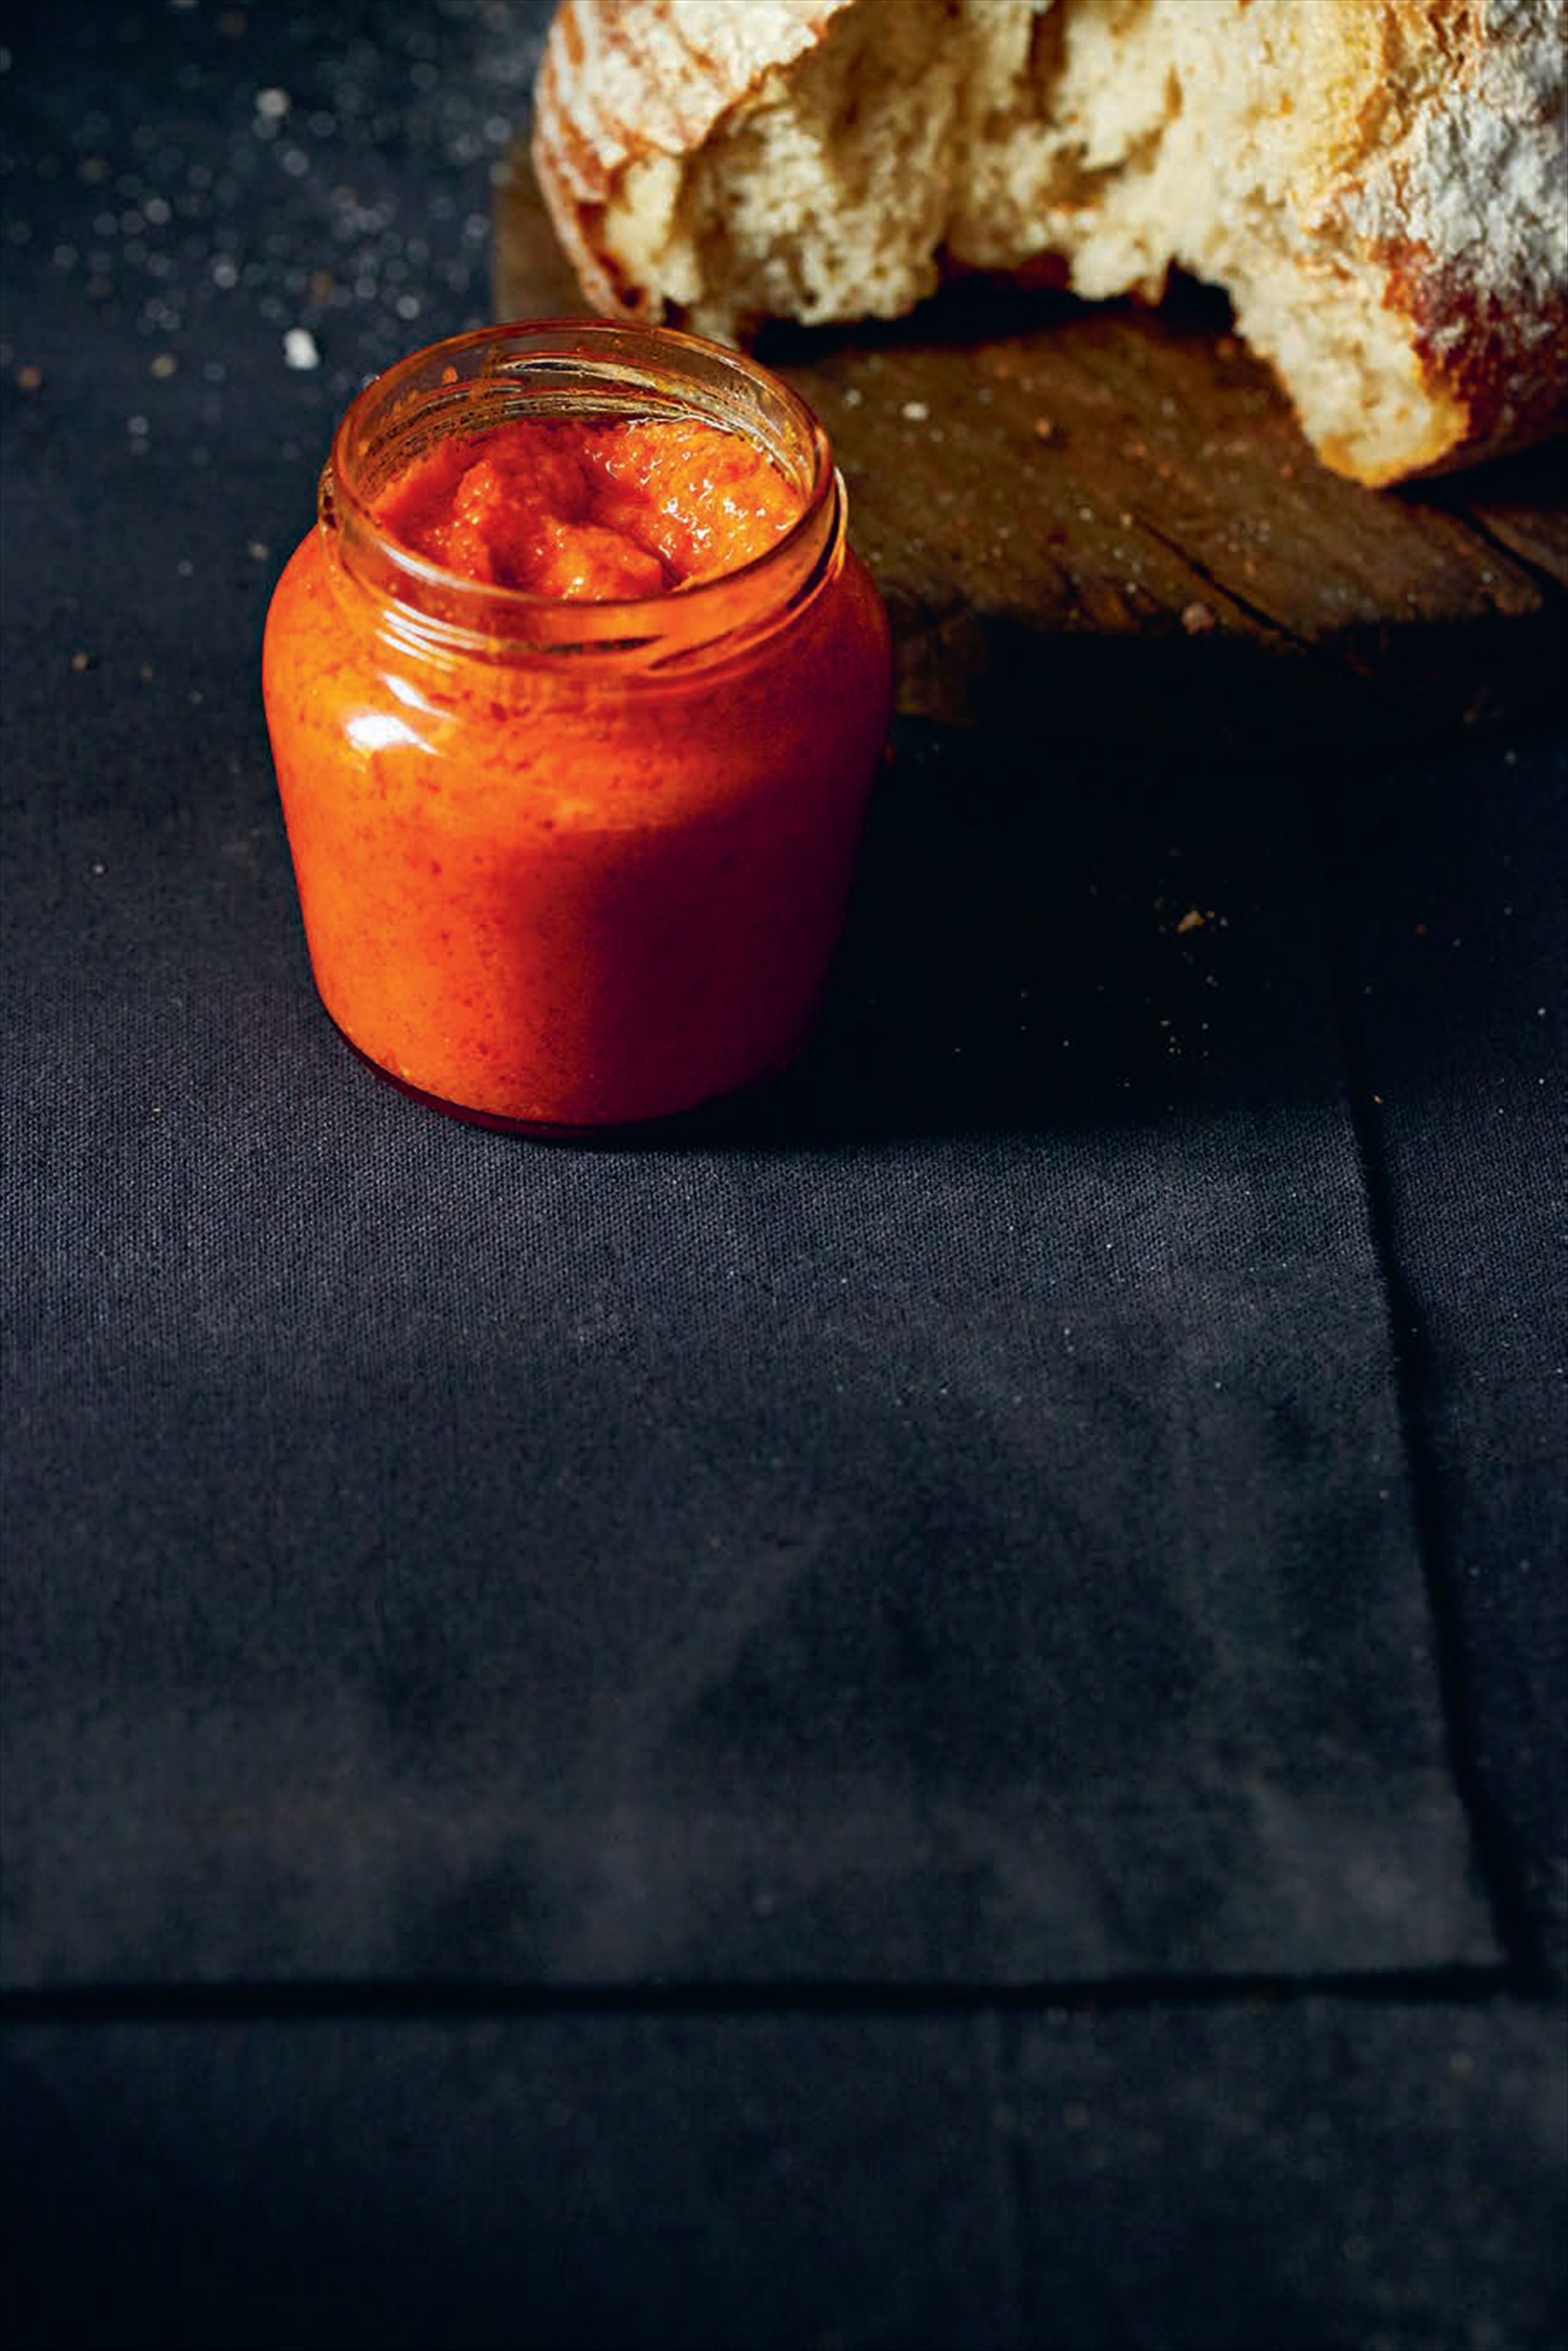 Roasted red pepper paste